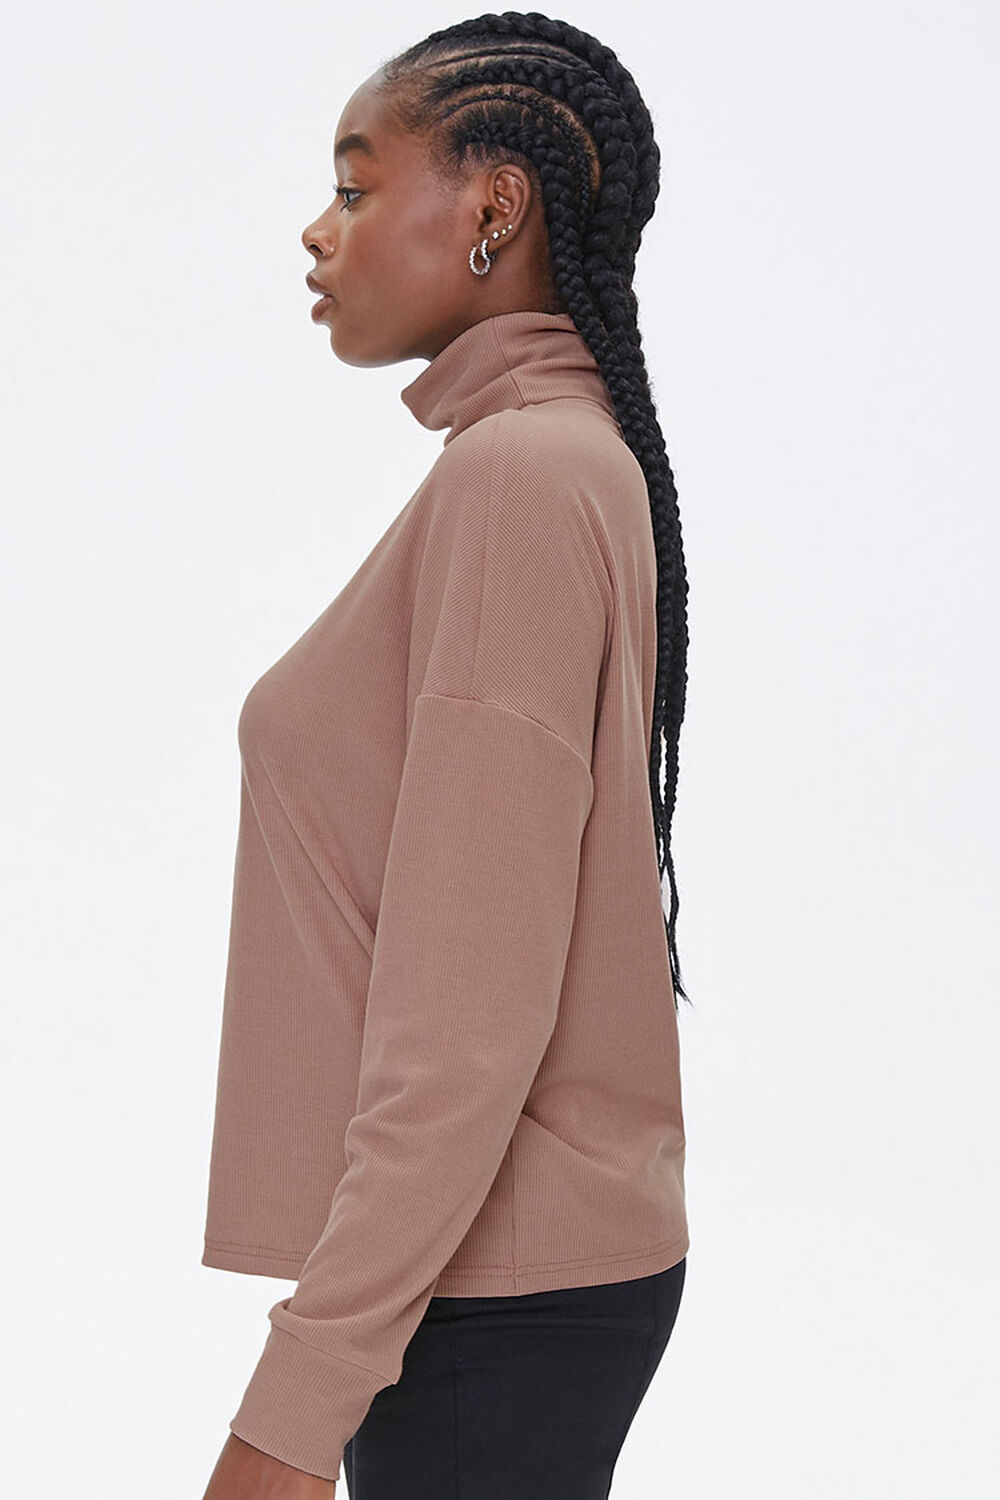 TAUPE Ribbed Turtleneck Top, image 2